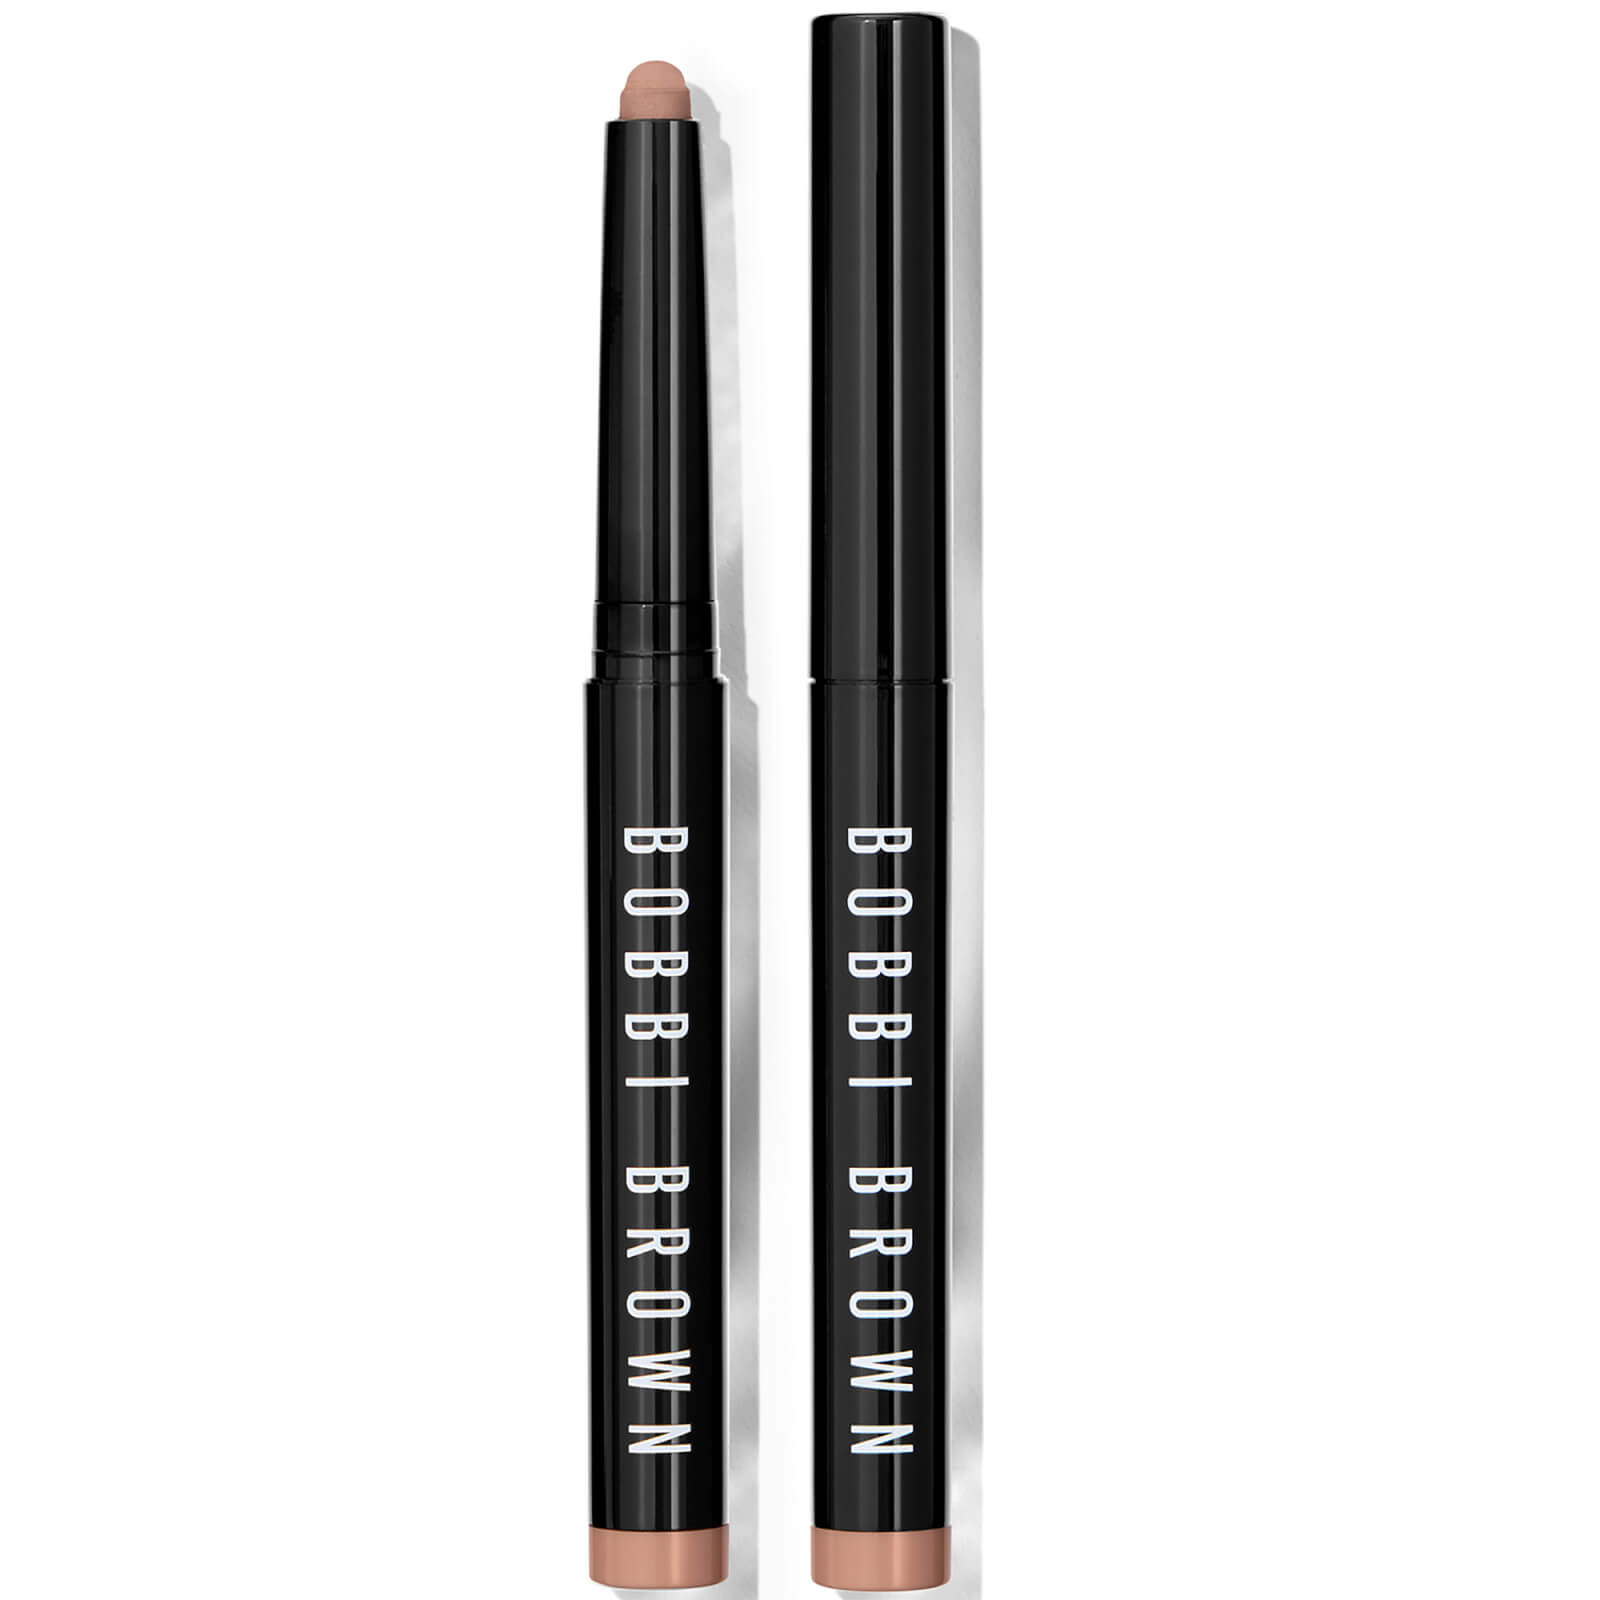 Image of Bobbi Brown Long-Wear Cream Shadow Stick (Various Shades) - Taupe